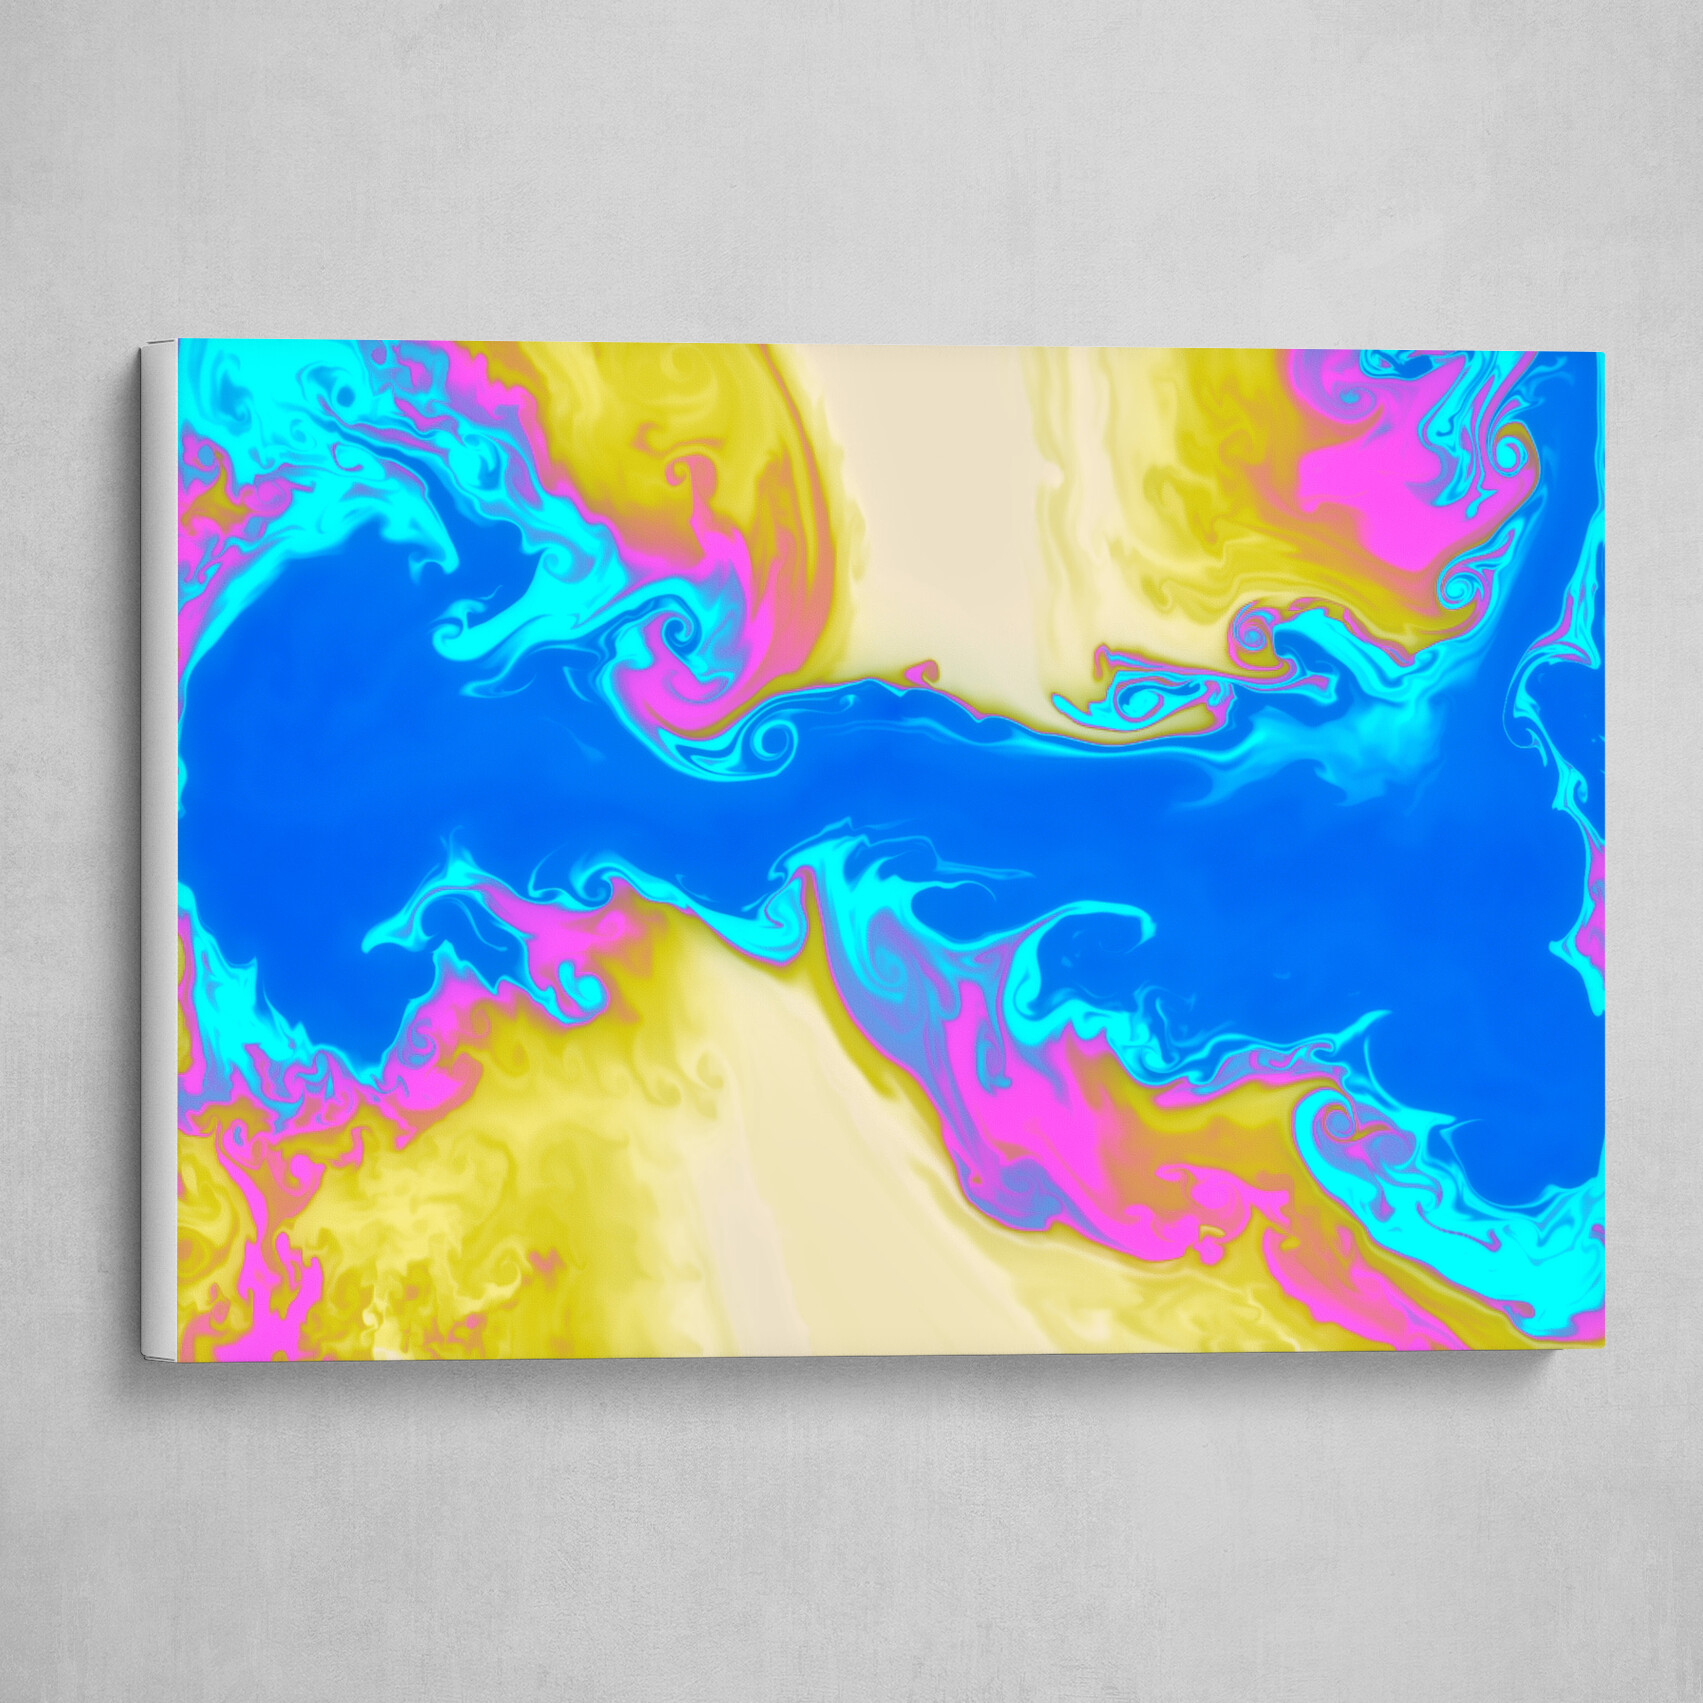 Blue Pink Yellow fluid abstract 3